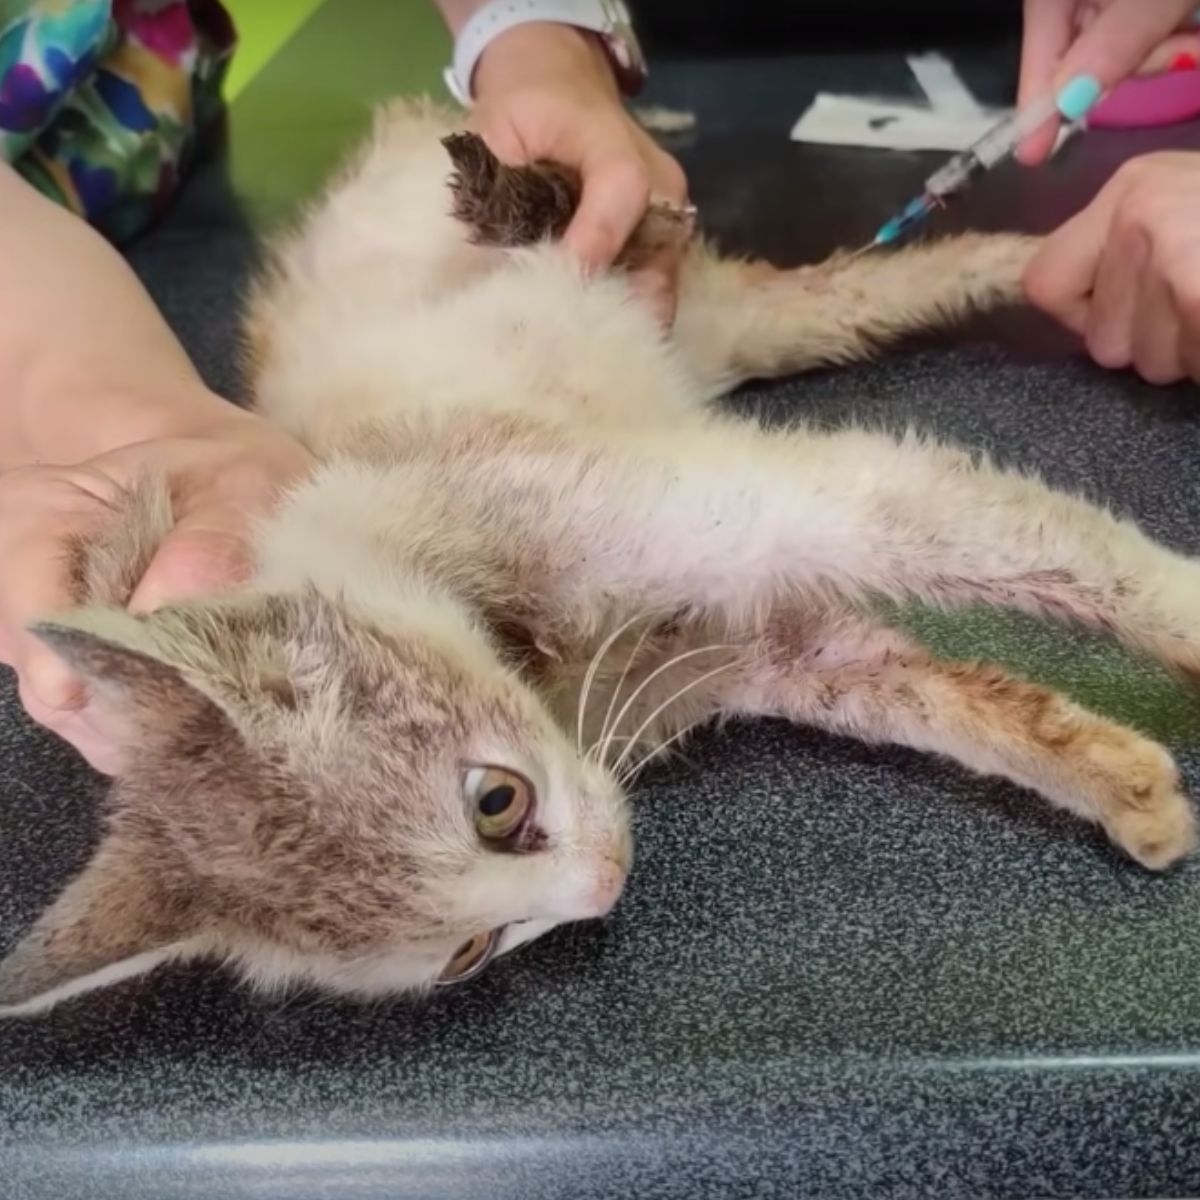 starving cat getting injection